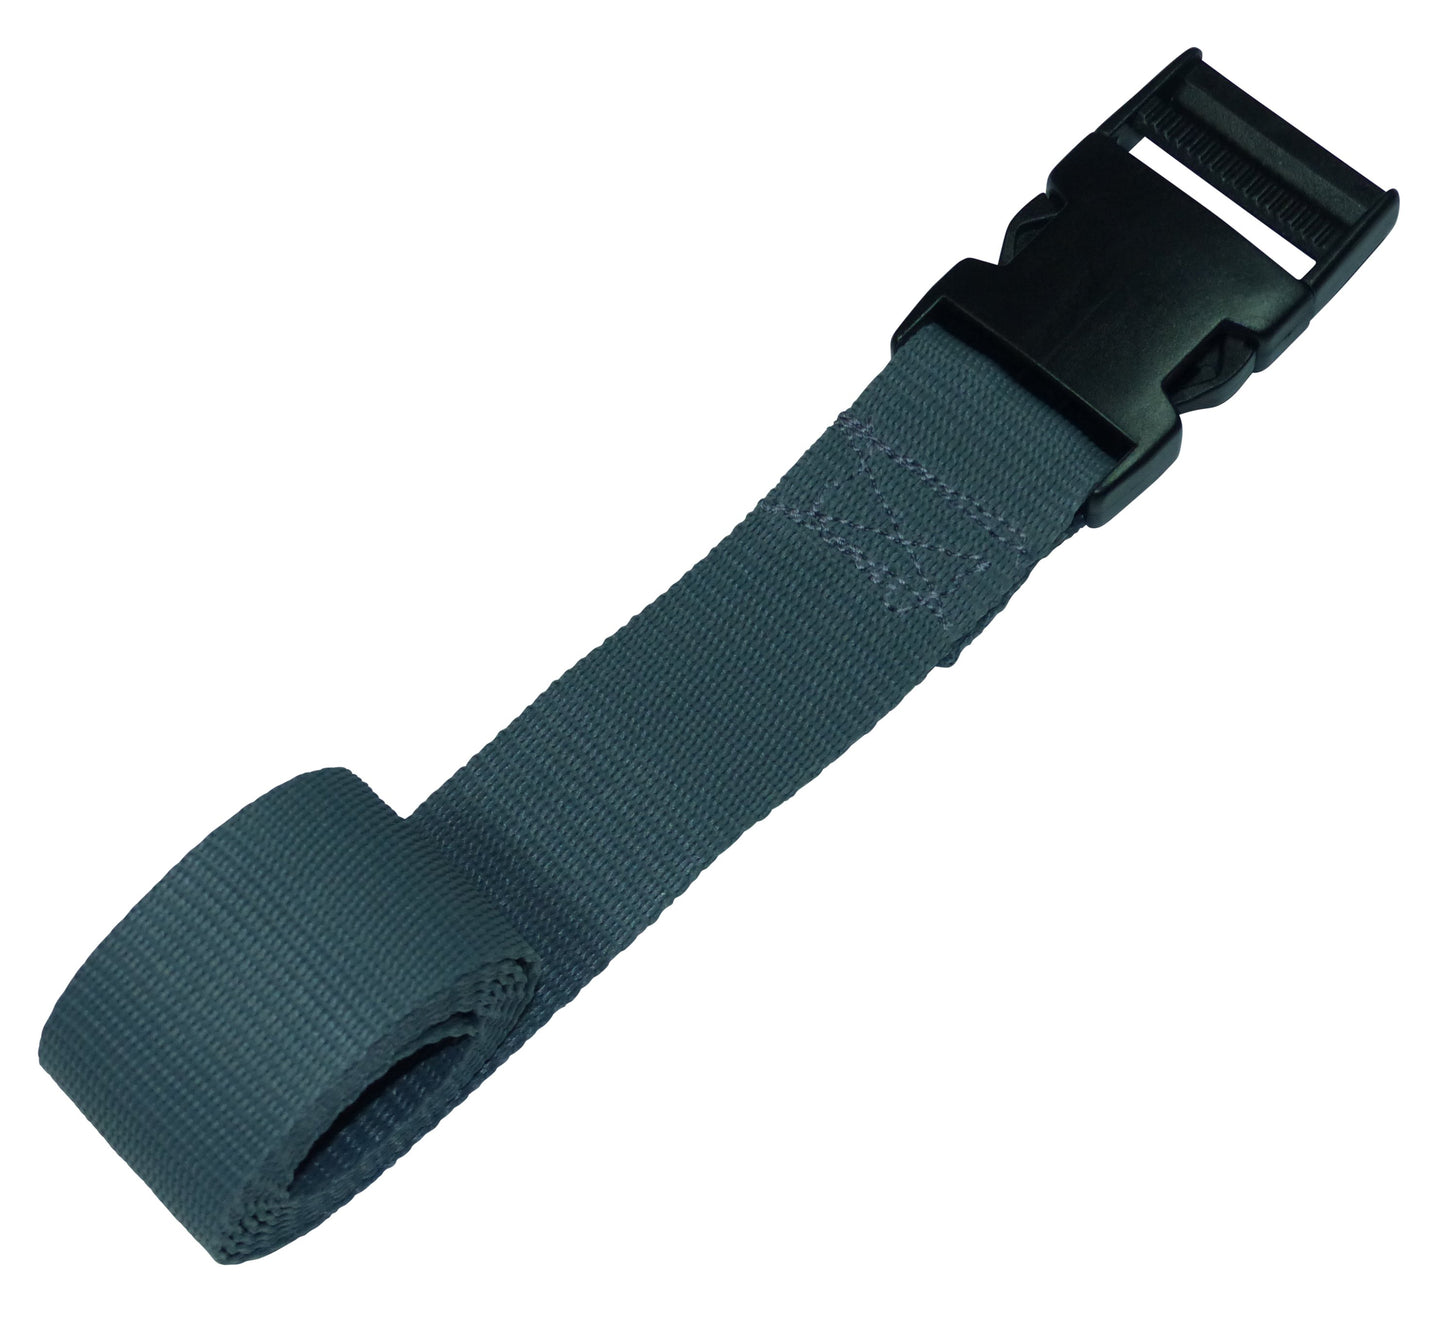 Benristraps 38mm Webbing Strap with Quick Release Buckle in grey